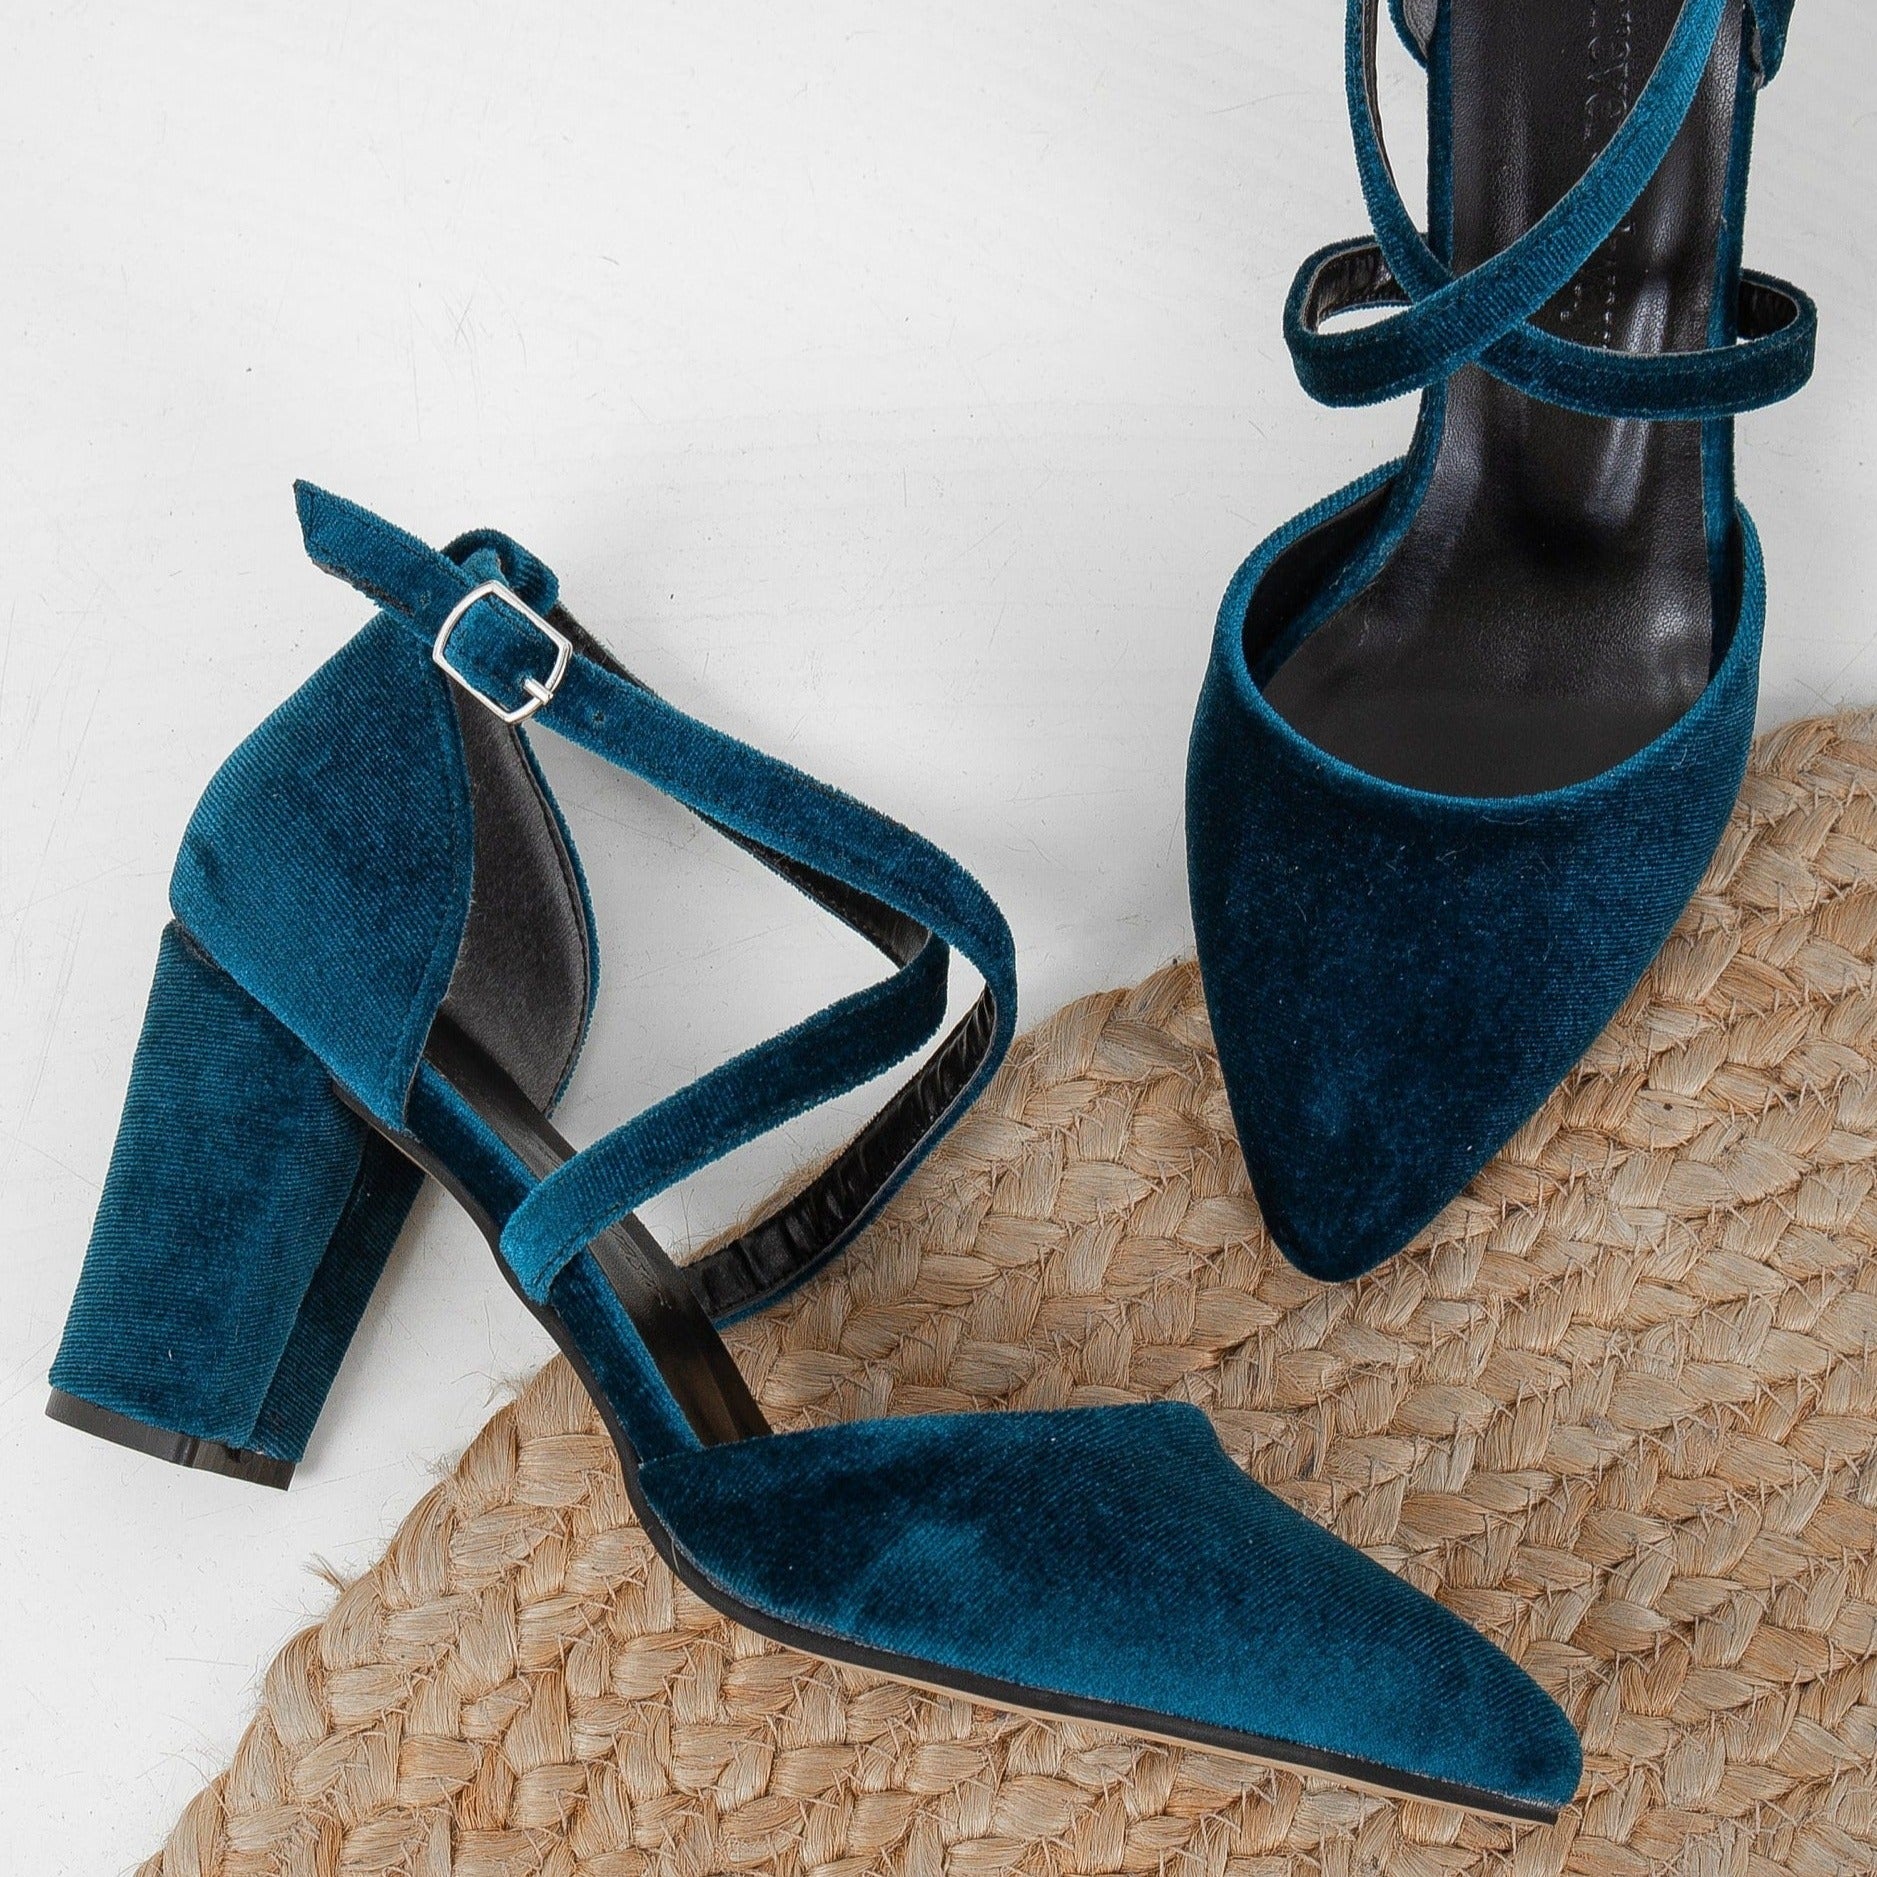 Teal Blue Velvet Court Shoes with a Low Kitten Heel